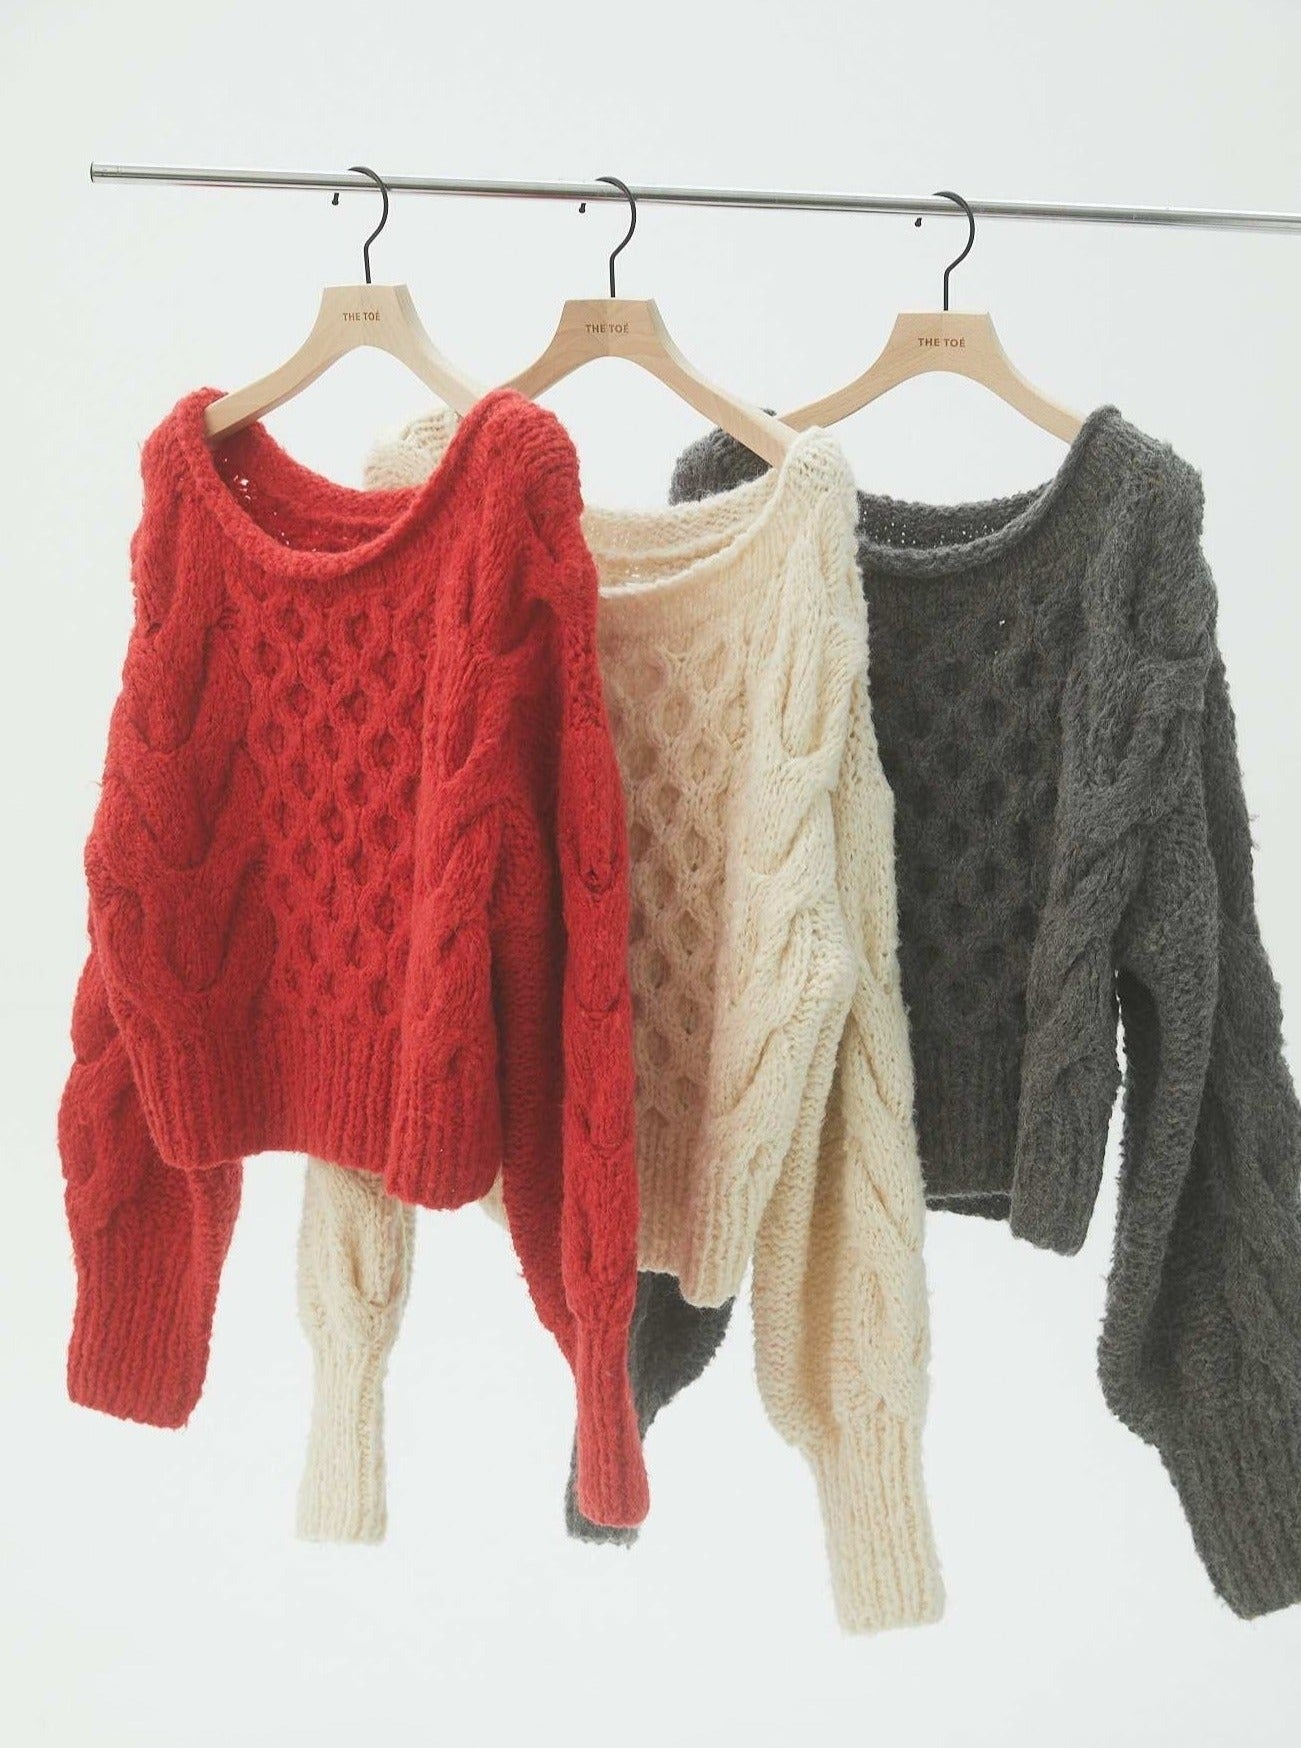 THE TOE NMES HANDMADE CABLE KNITニットセーター着用回数3回